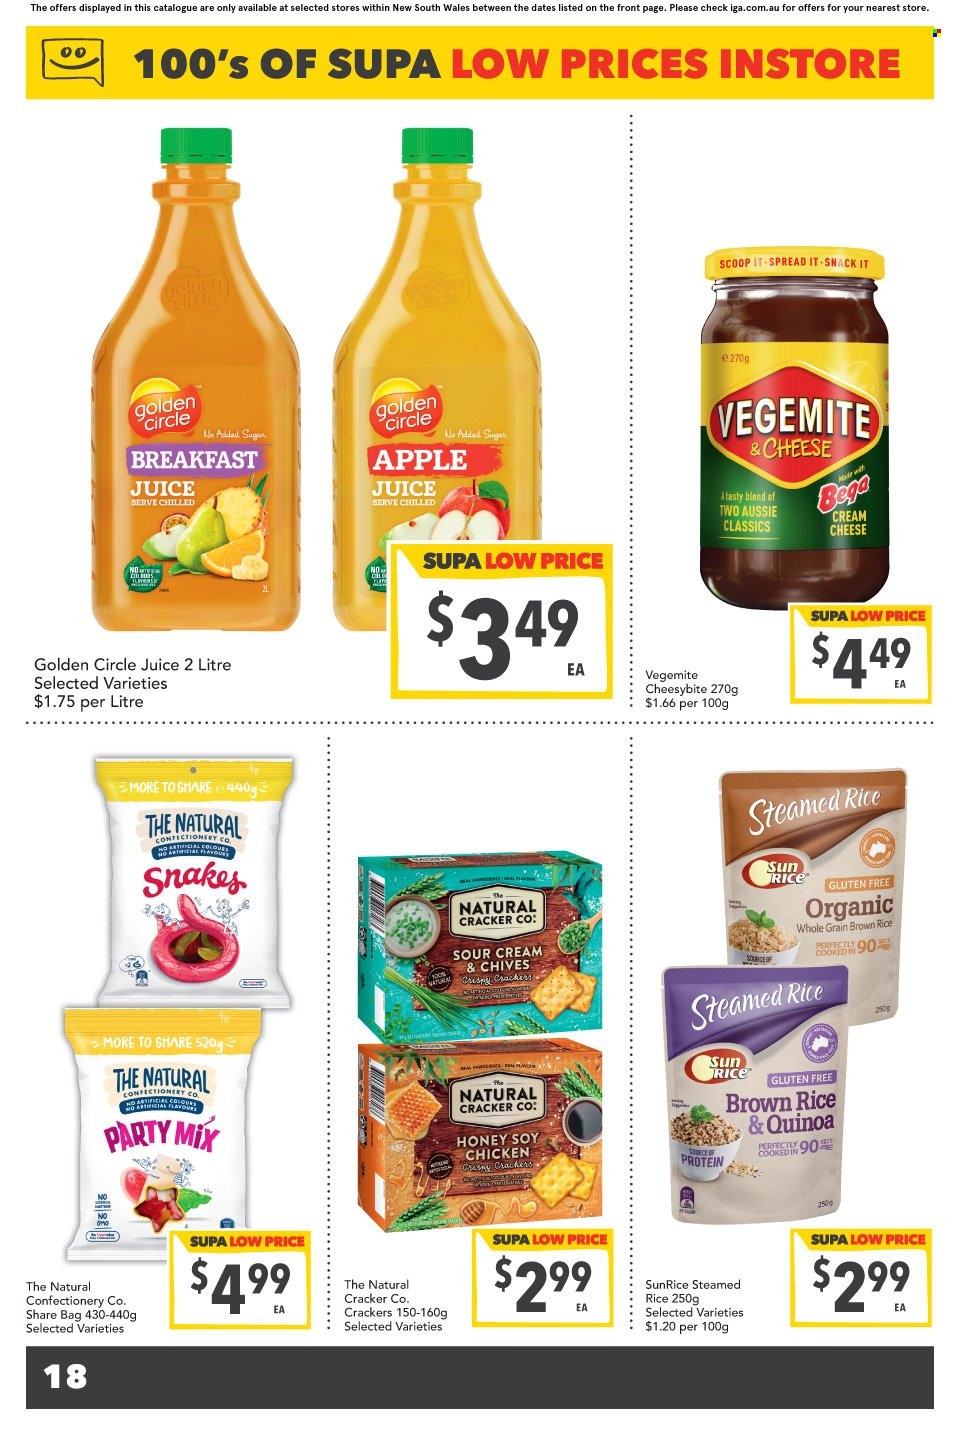 thumbnail - SUPA VALU Catalogue - 30 Nov 2022 - 6 Dec 2022 - Sales products - chives, cream cheese, snack, crackers, brown rice, quinoa, honey, apple juice, juice, Omo, Aussie, bag. Page 19.